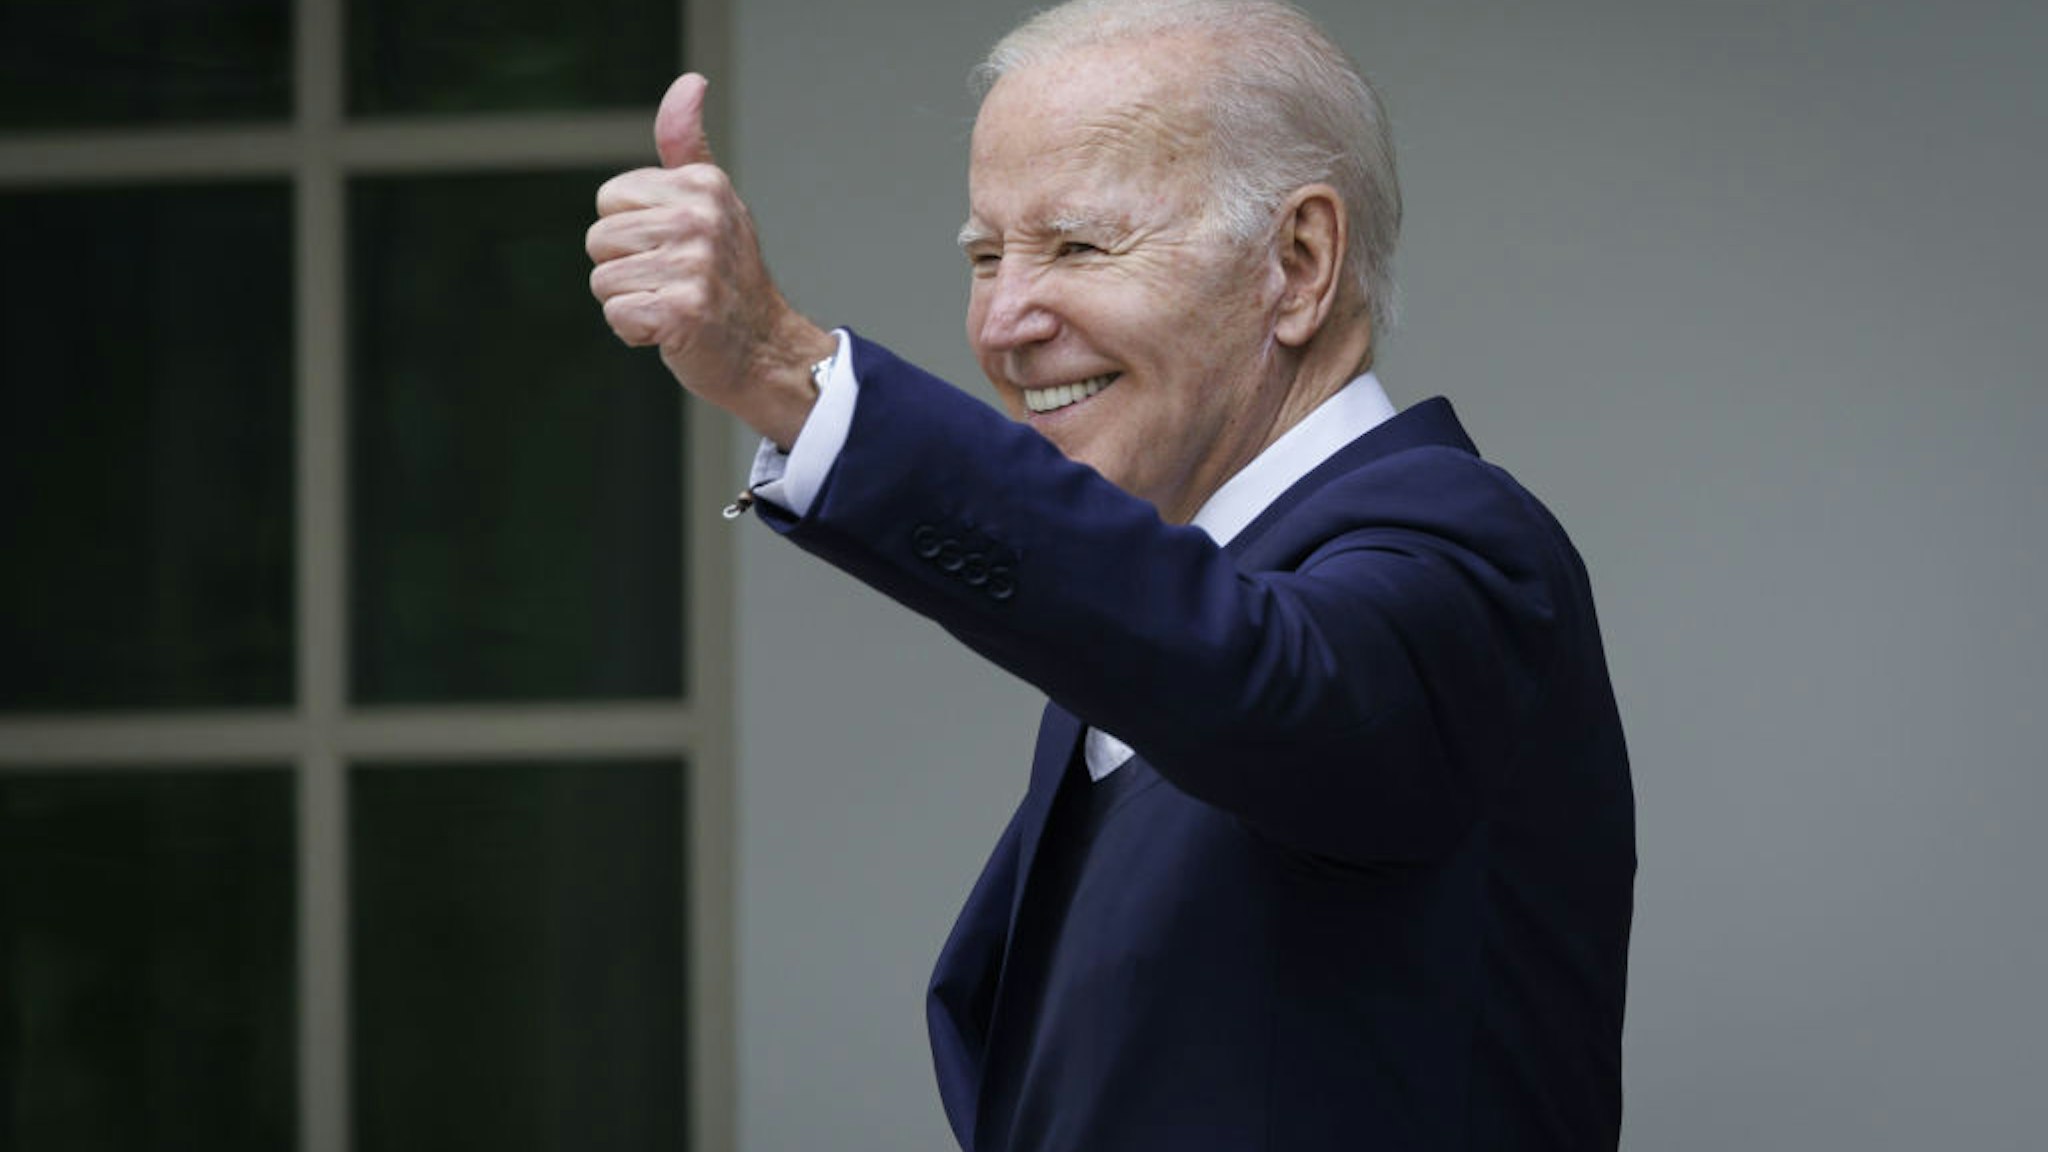 US President Joe Biden, waves back to the crowd during a National Small Business Week event in the Rose Garden of the White House in Washington, DC, US, on Monday, May 1, 2023. The White House said Biden administration investments in America has led to 10.5 million applications to start small businesses in 2021 and 2022. Photographer: Ting Shen/Bloomberg via Getty Images